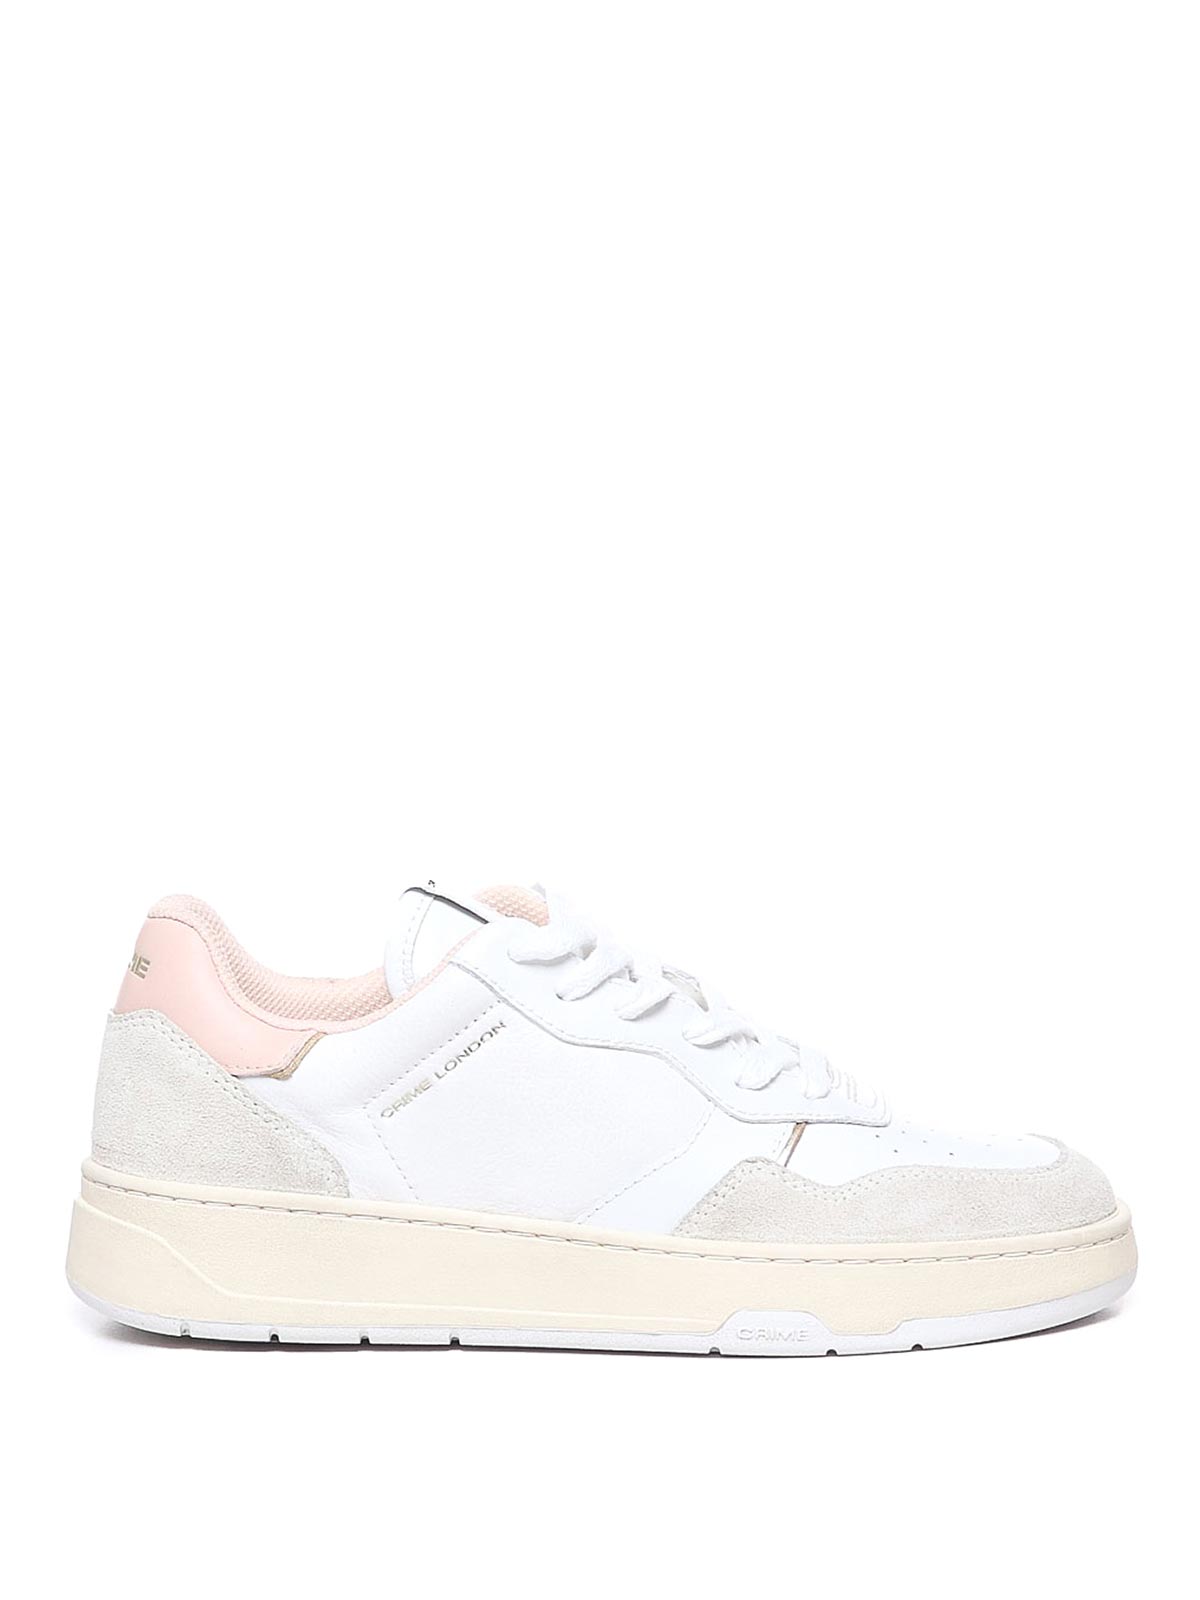 Crime London Timeless Sneakers In White